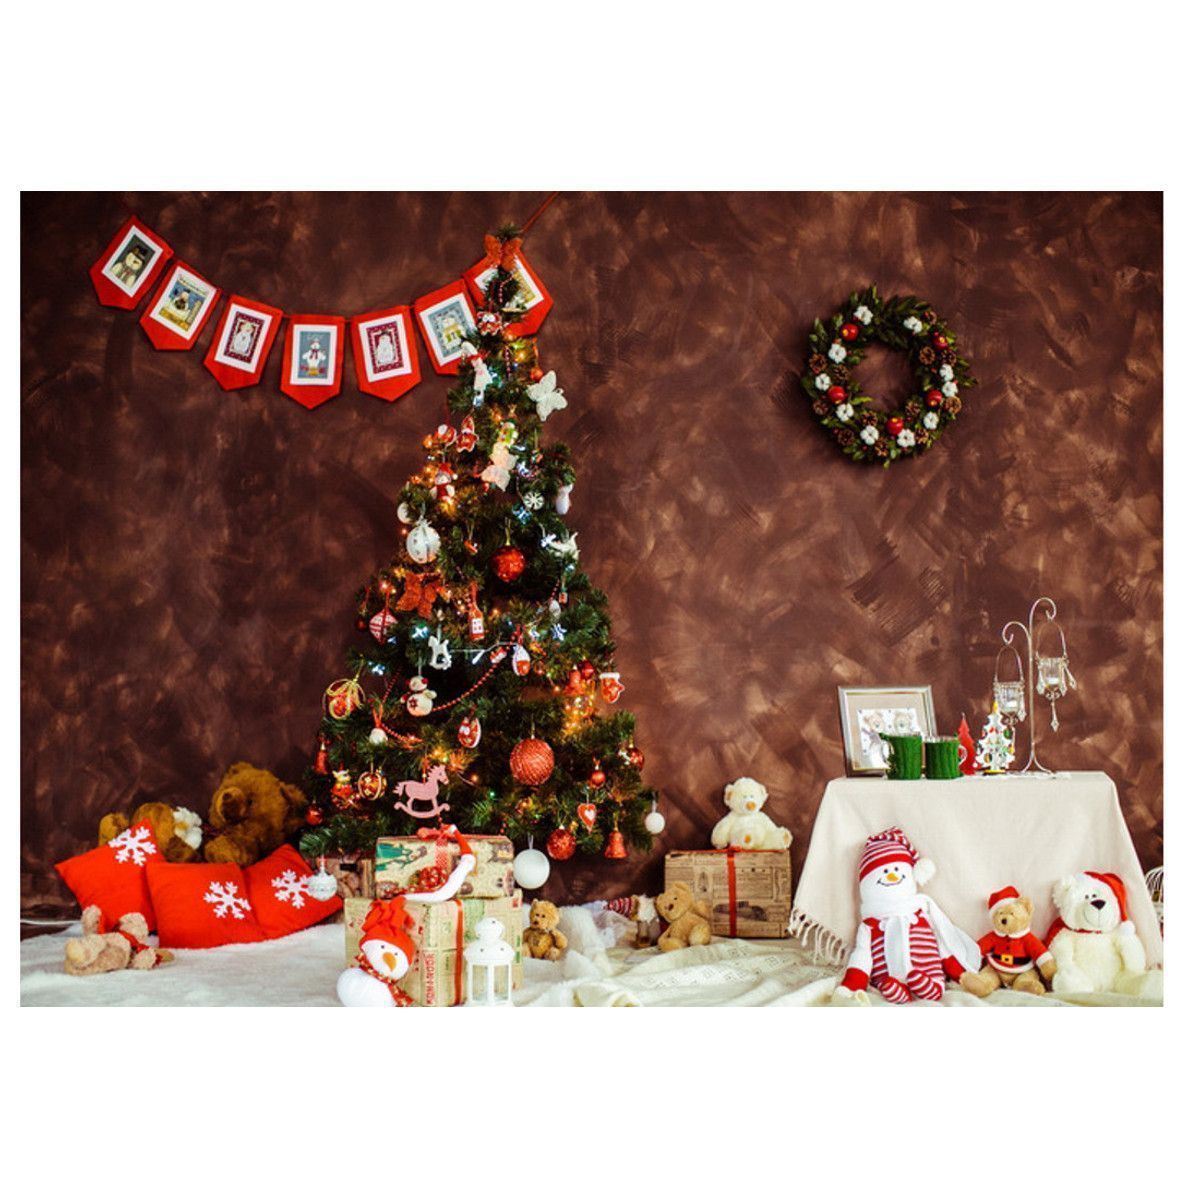 Christmas-Tree-Photography-Background-Vinyl-Cloth-Studio-Background-Cloth-Home-Party-Decoration-Prop-1763679